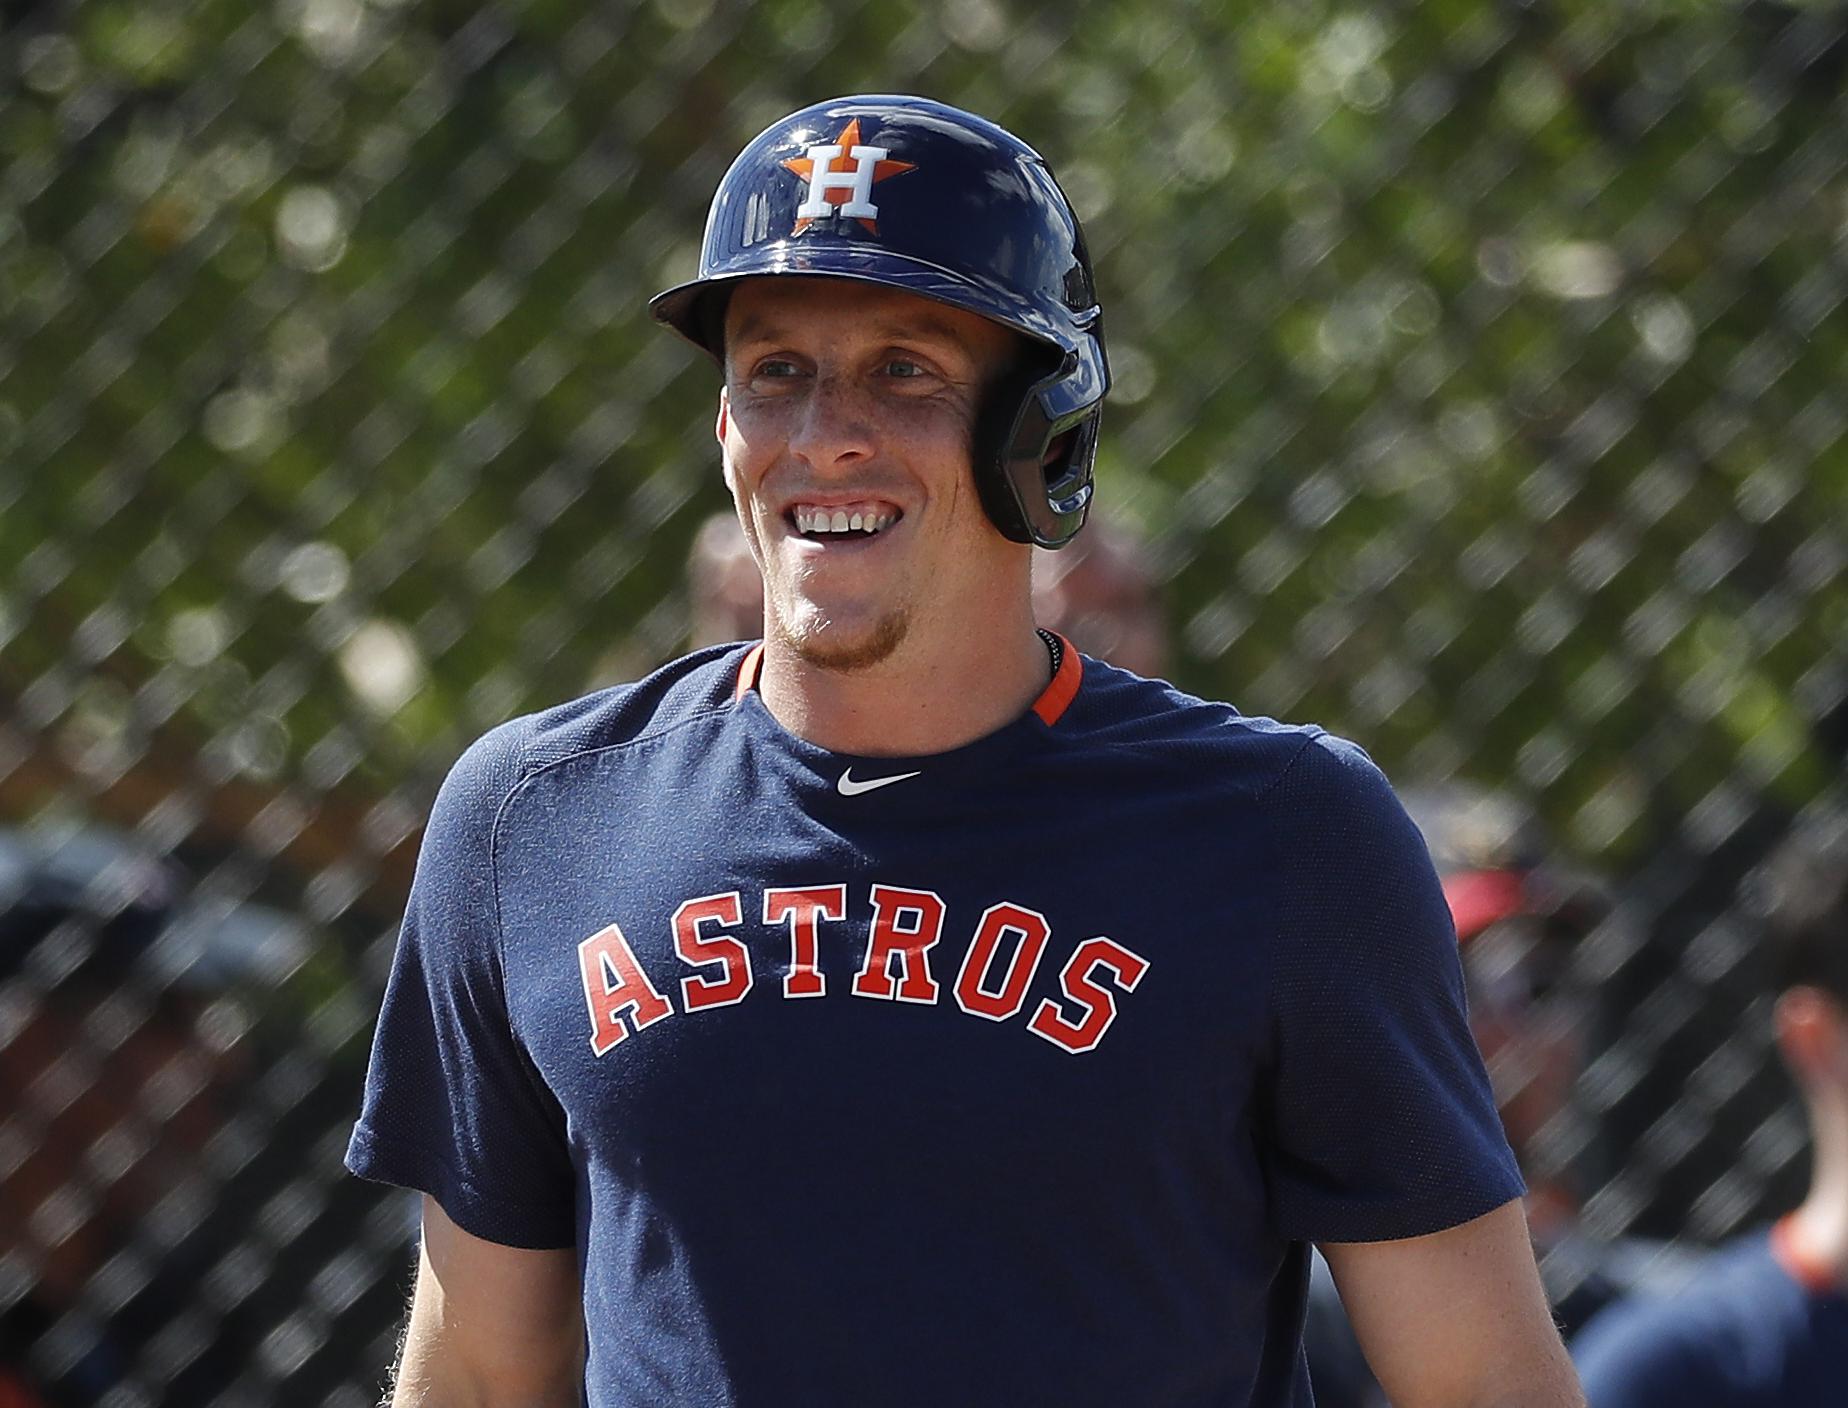 Myles Straw's approach to his big Astros opportunity is simple